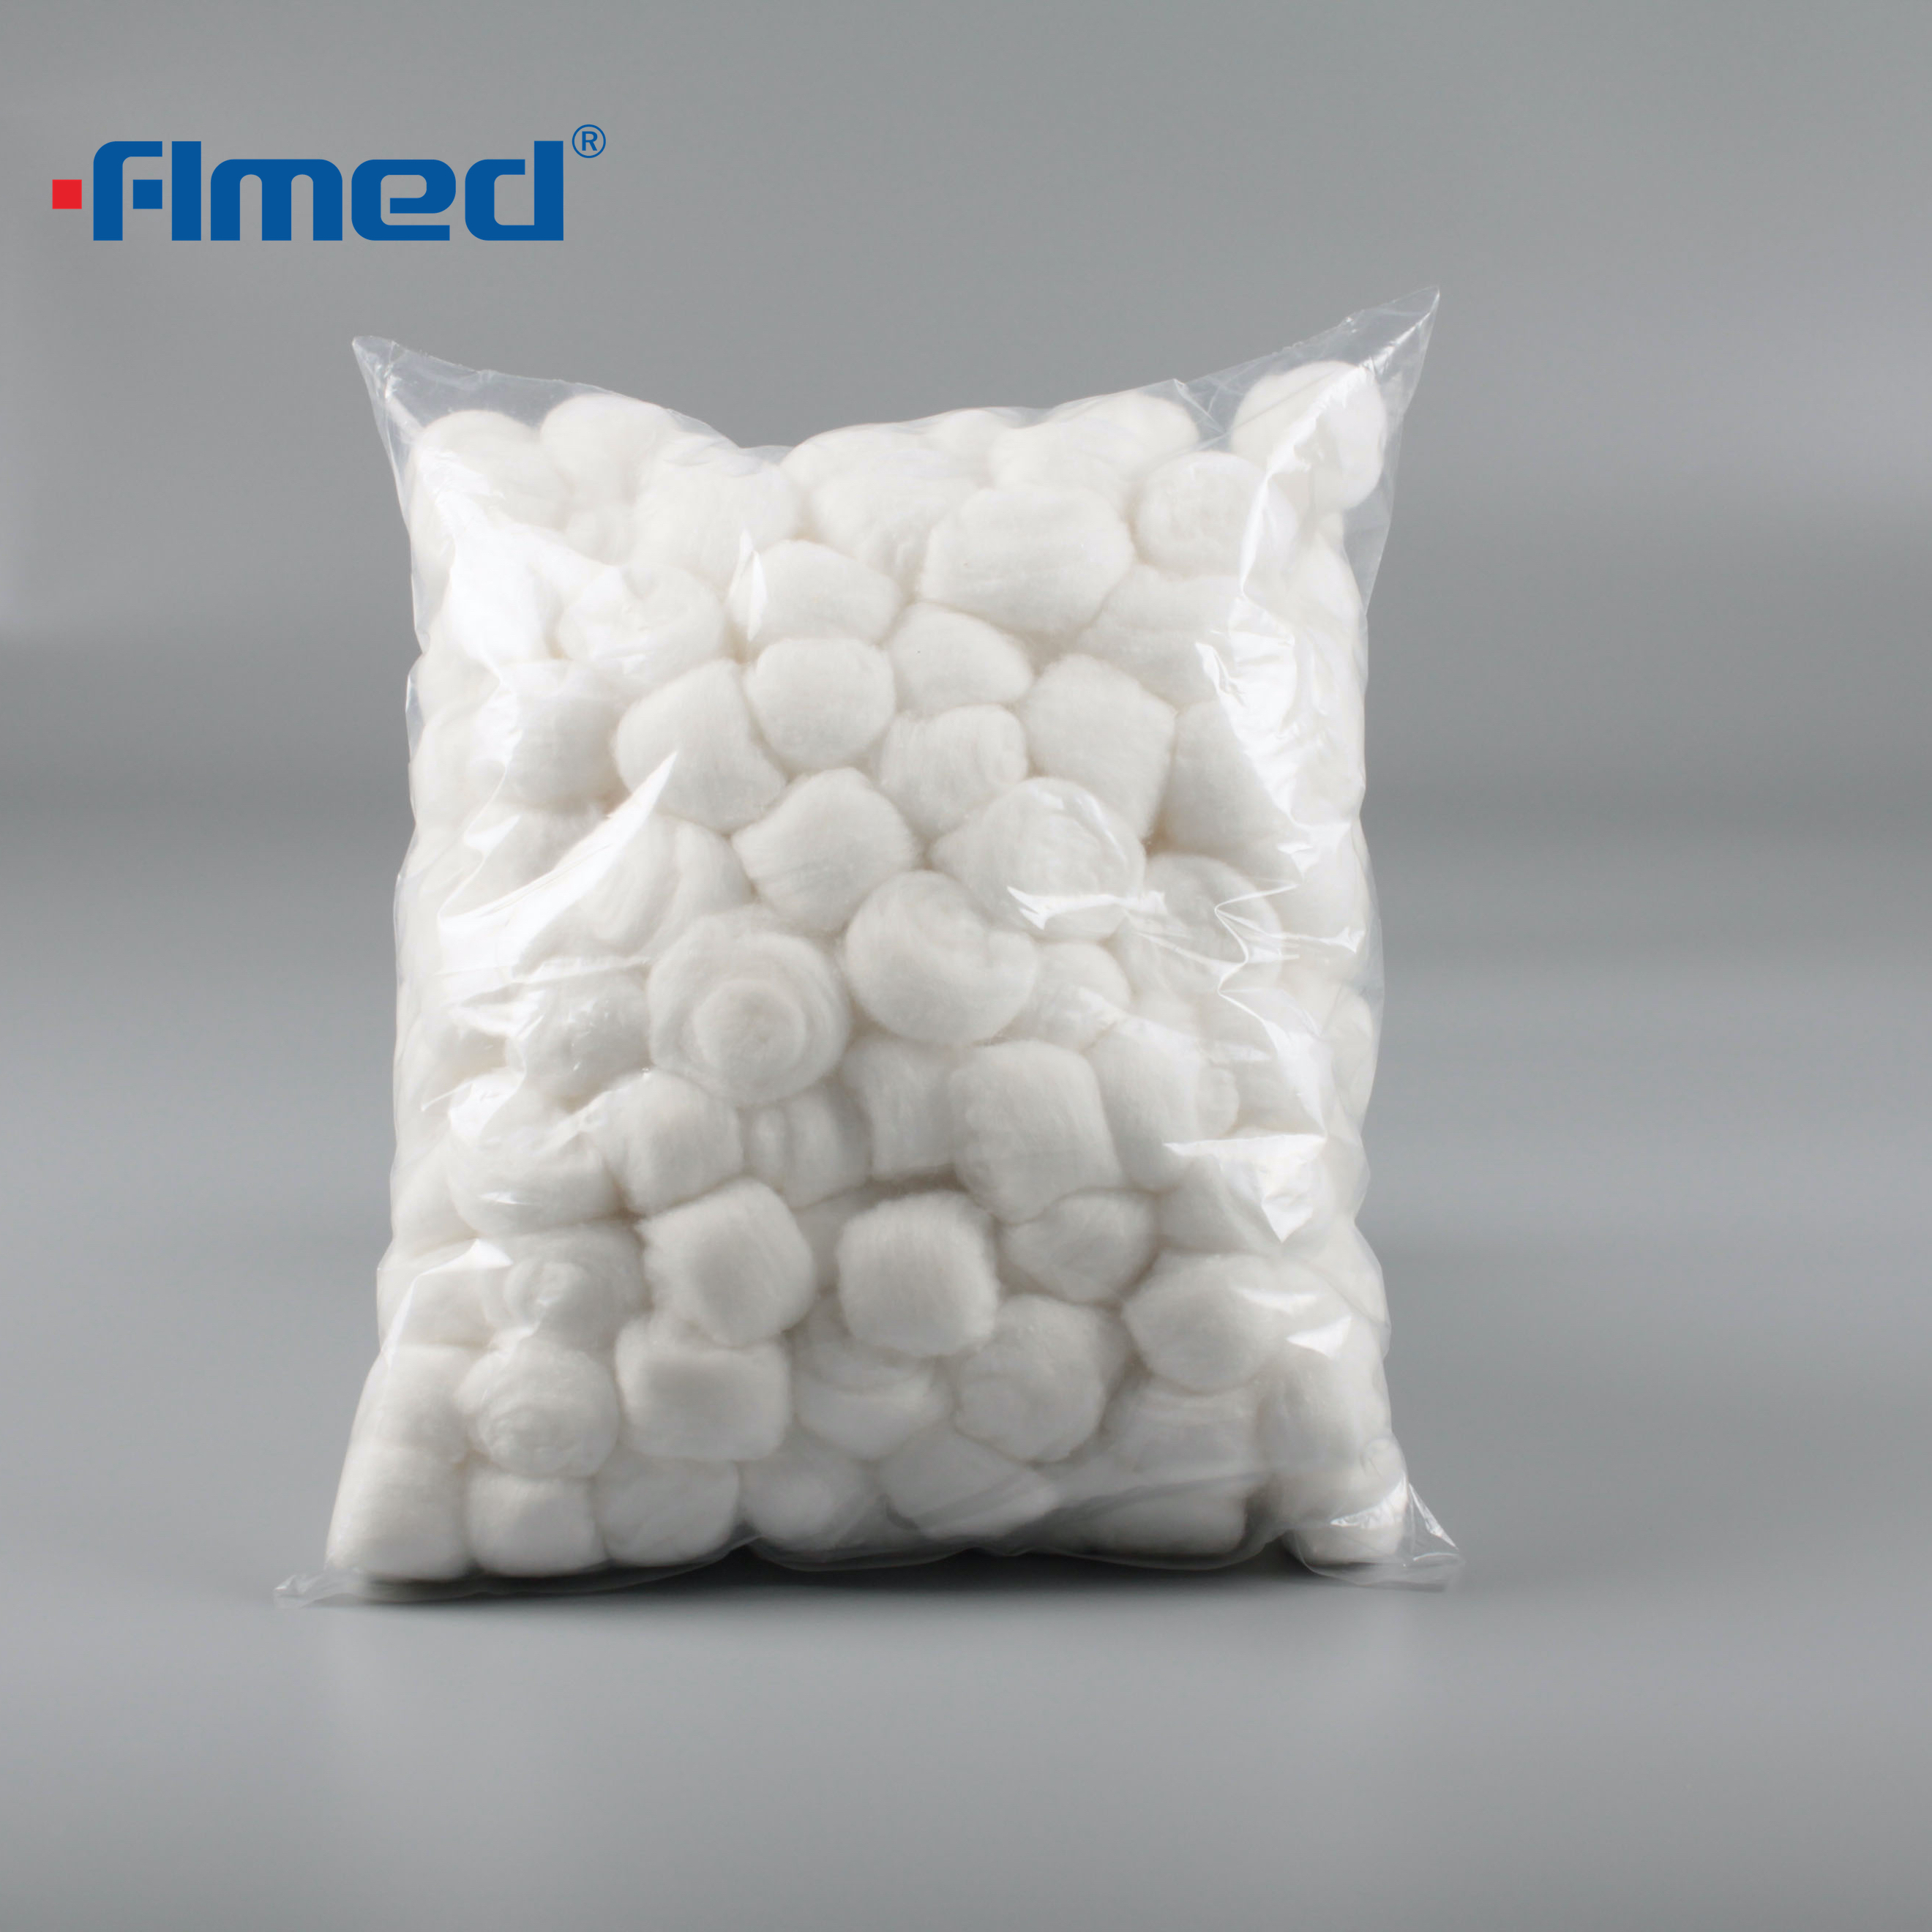 Low Price Medical Surgical Alcohol Small Size Cotton Ball - China